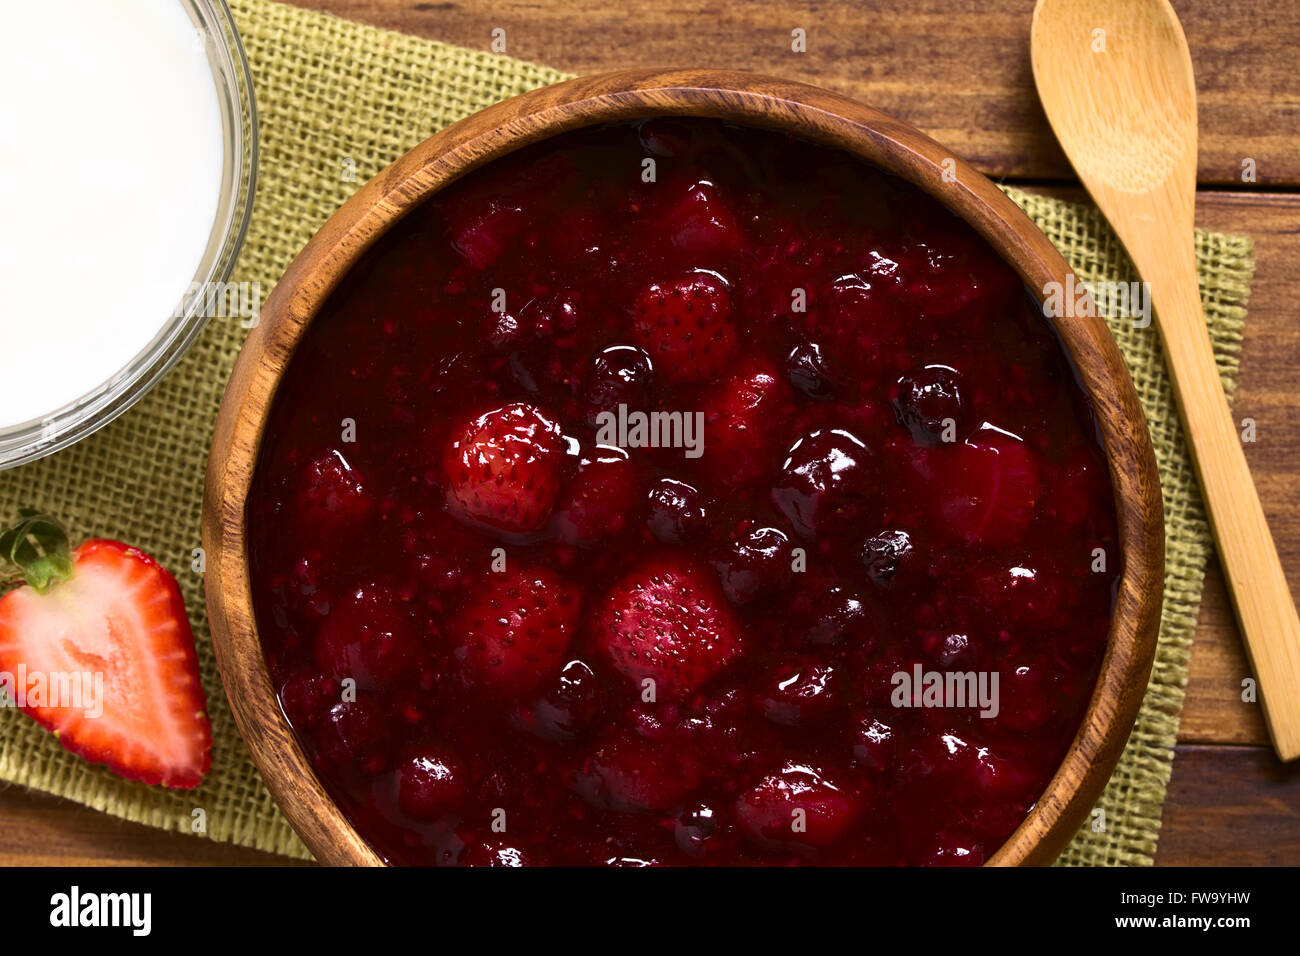 German Rote Gruetze (red groats) red berry pudding made of strawberry, blueberry, raspberry and redcurrants Stock Photo